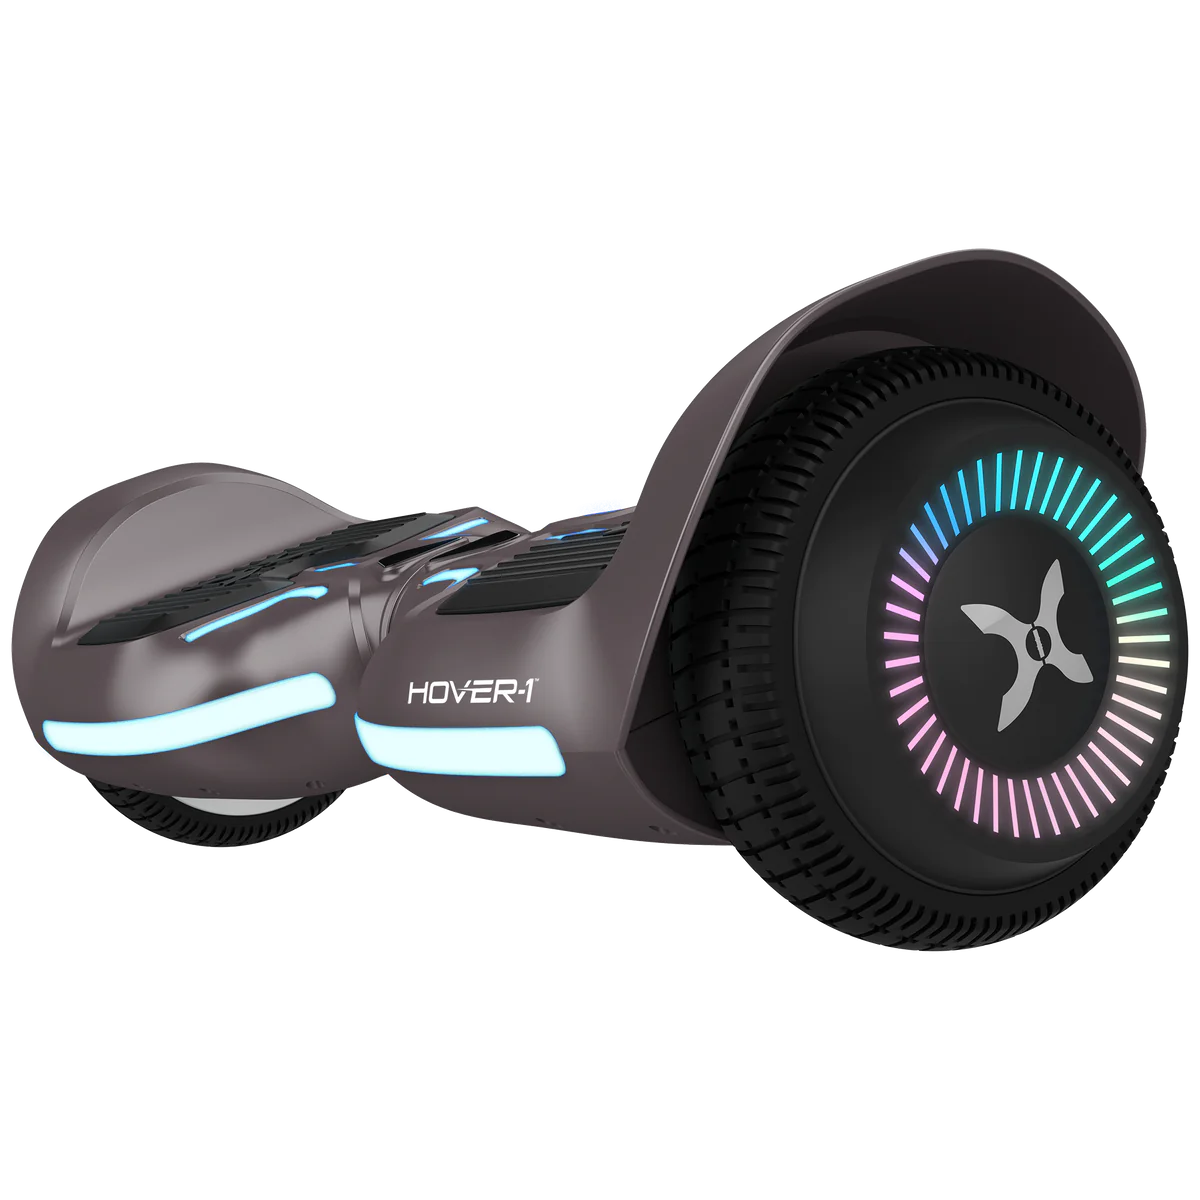 Hoverboard price